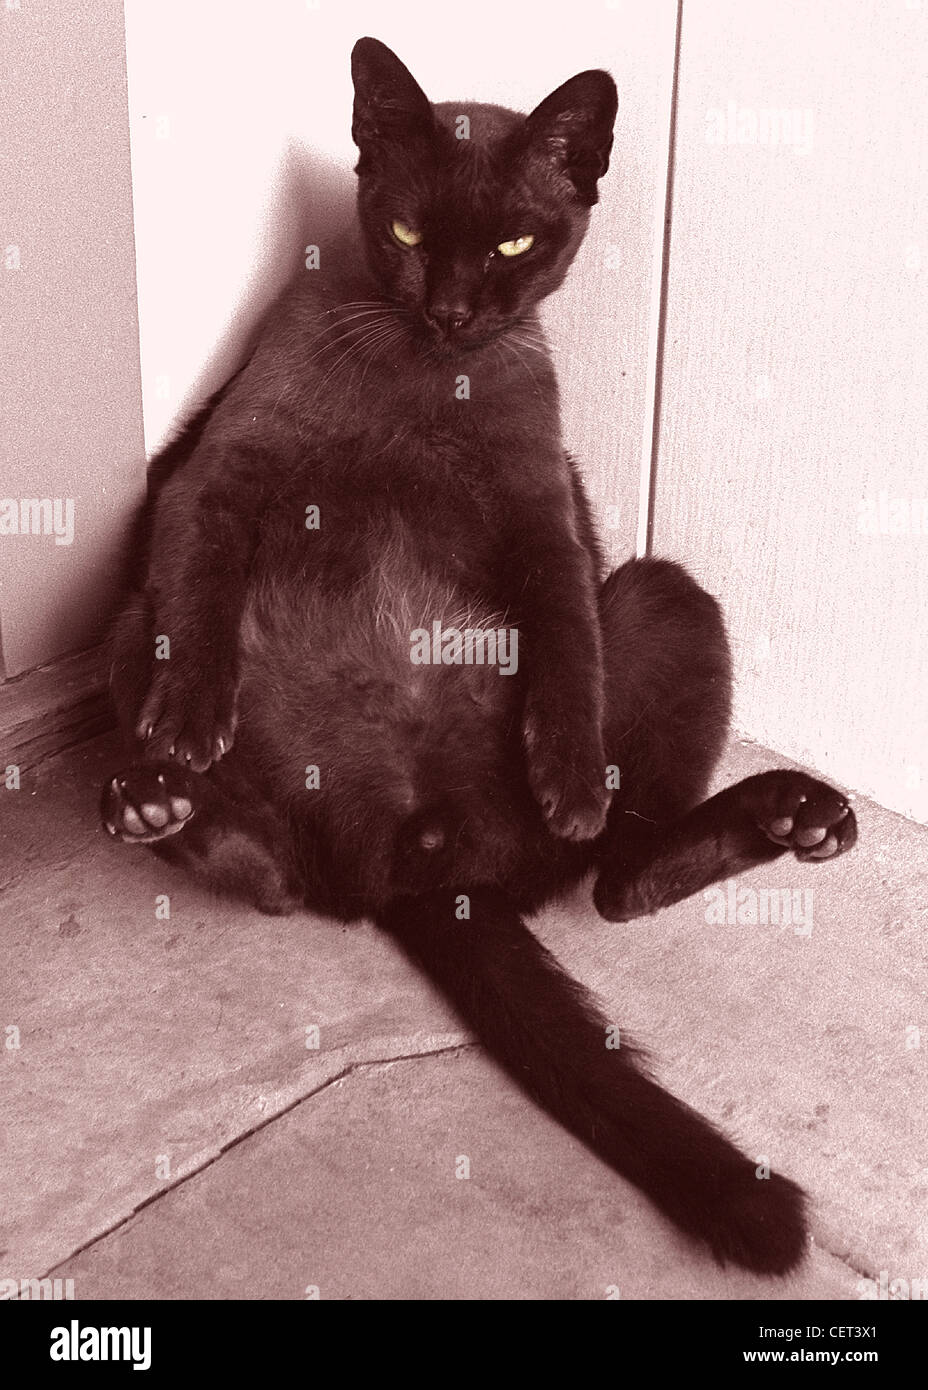 Cat sitting in corner with legs spread.  Fun whimsical, silly vertical sepia colored black and white photograph.  Burmese breed of feline Stock Photo